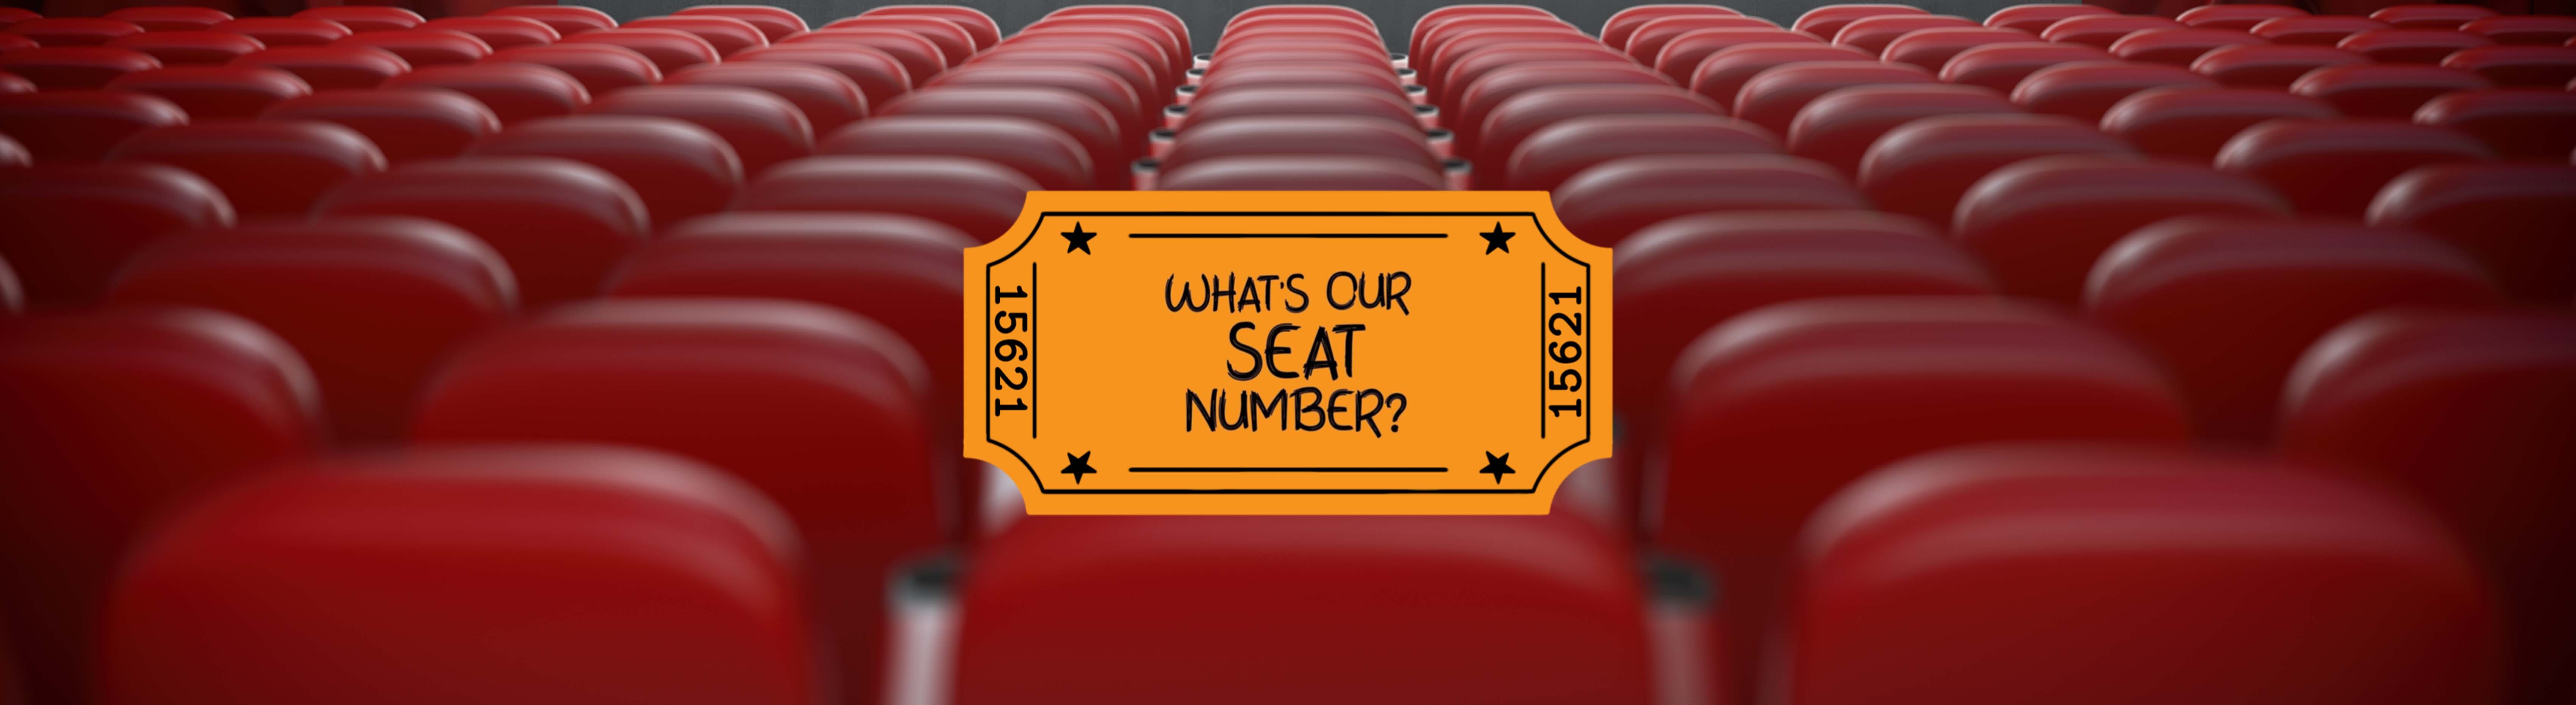 What‘s Our Seat Number?